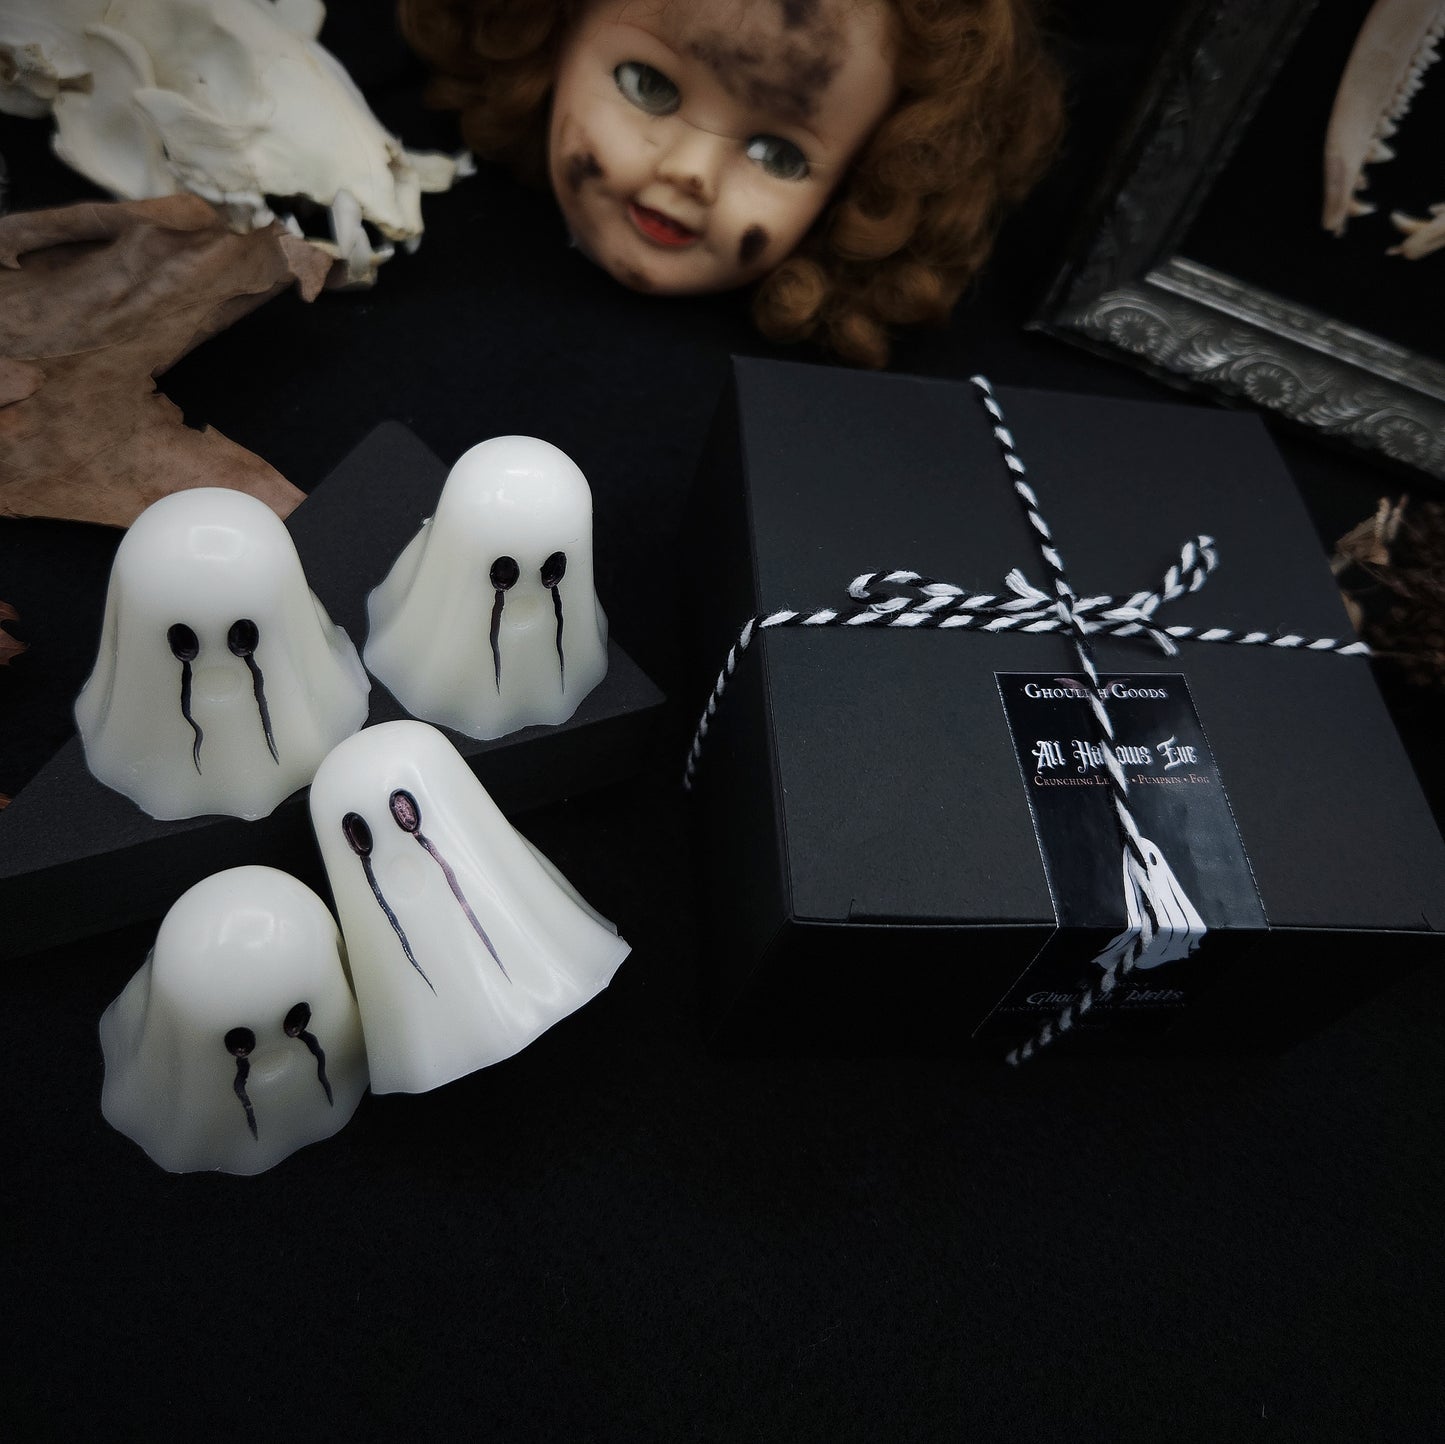 All Hallows Eve Ghost Wax Melts